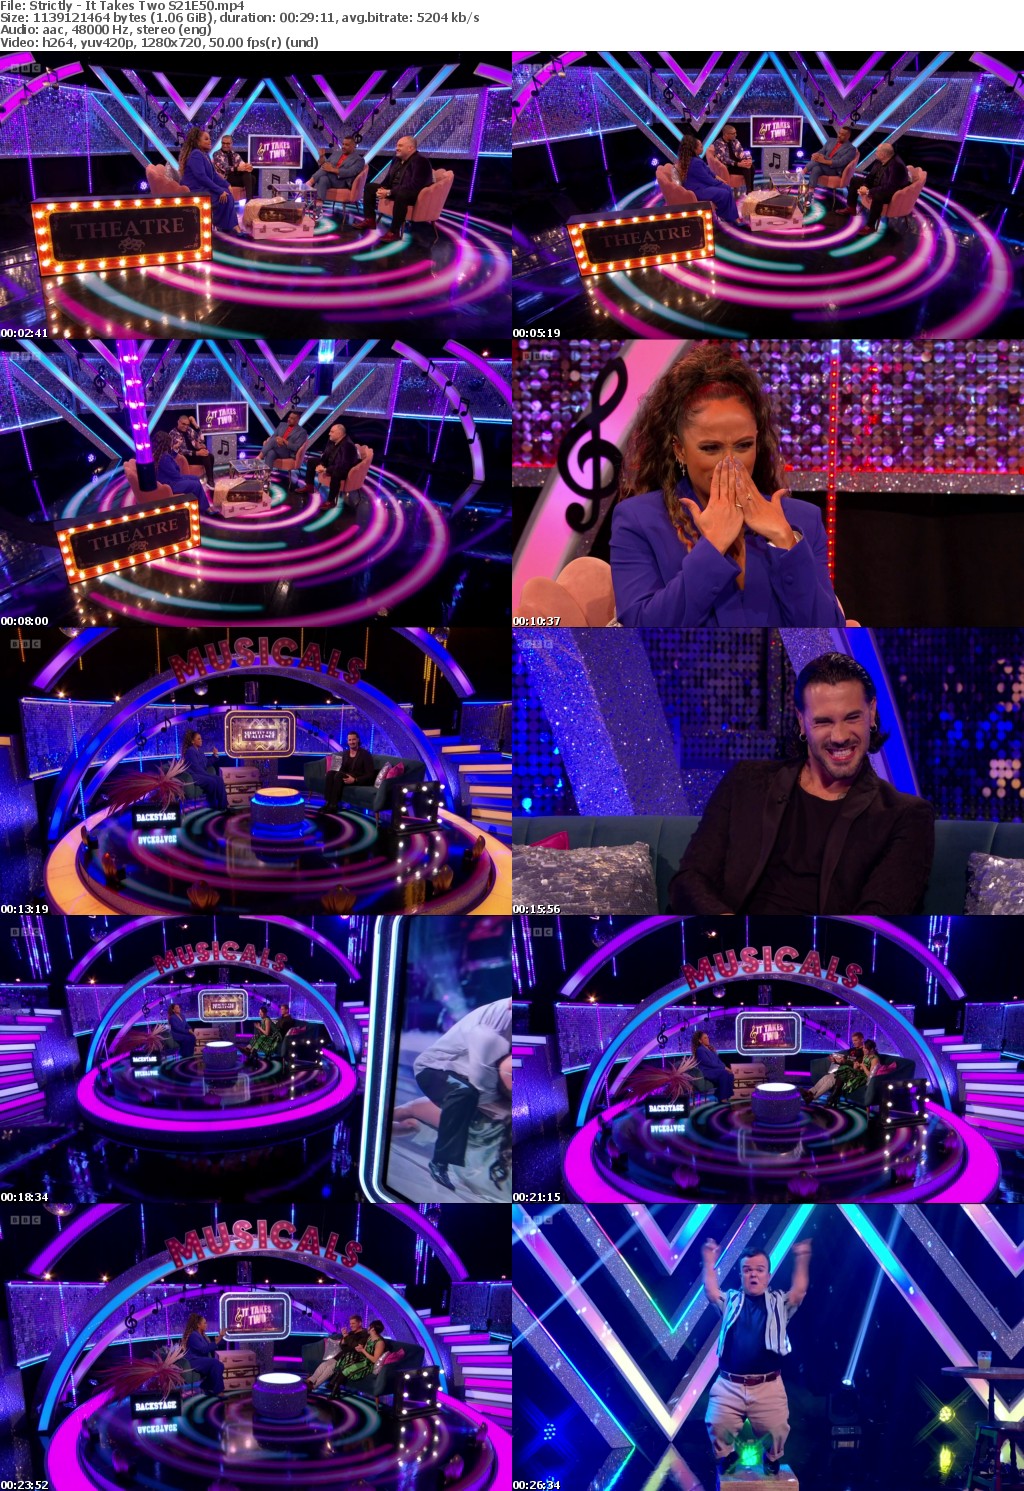 Strictly - It Takes Two S21E50 (1280x720p HD, 50fps, soft Eng subs)